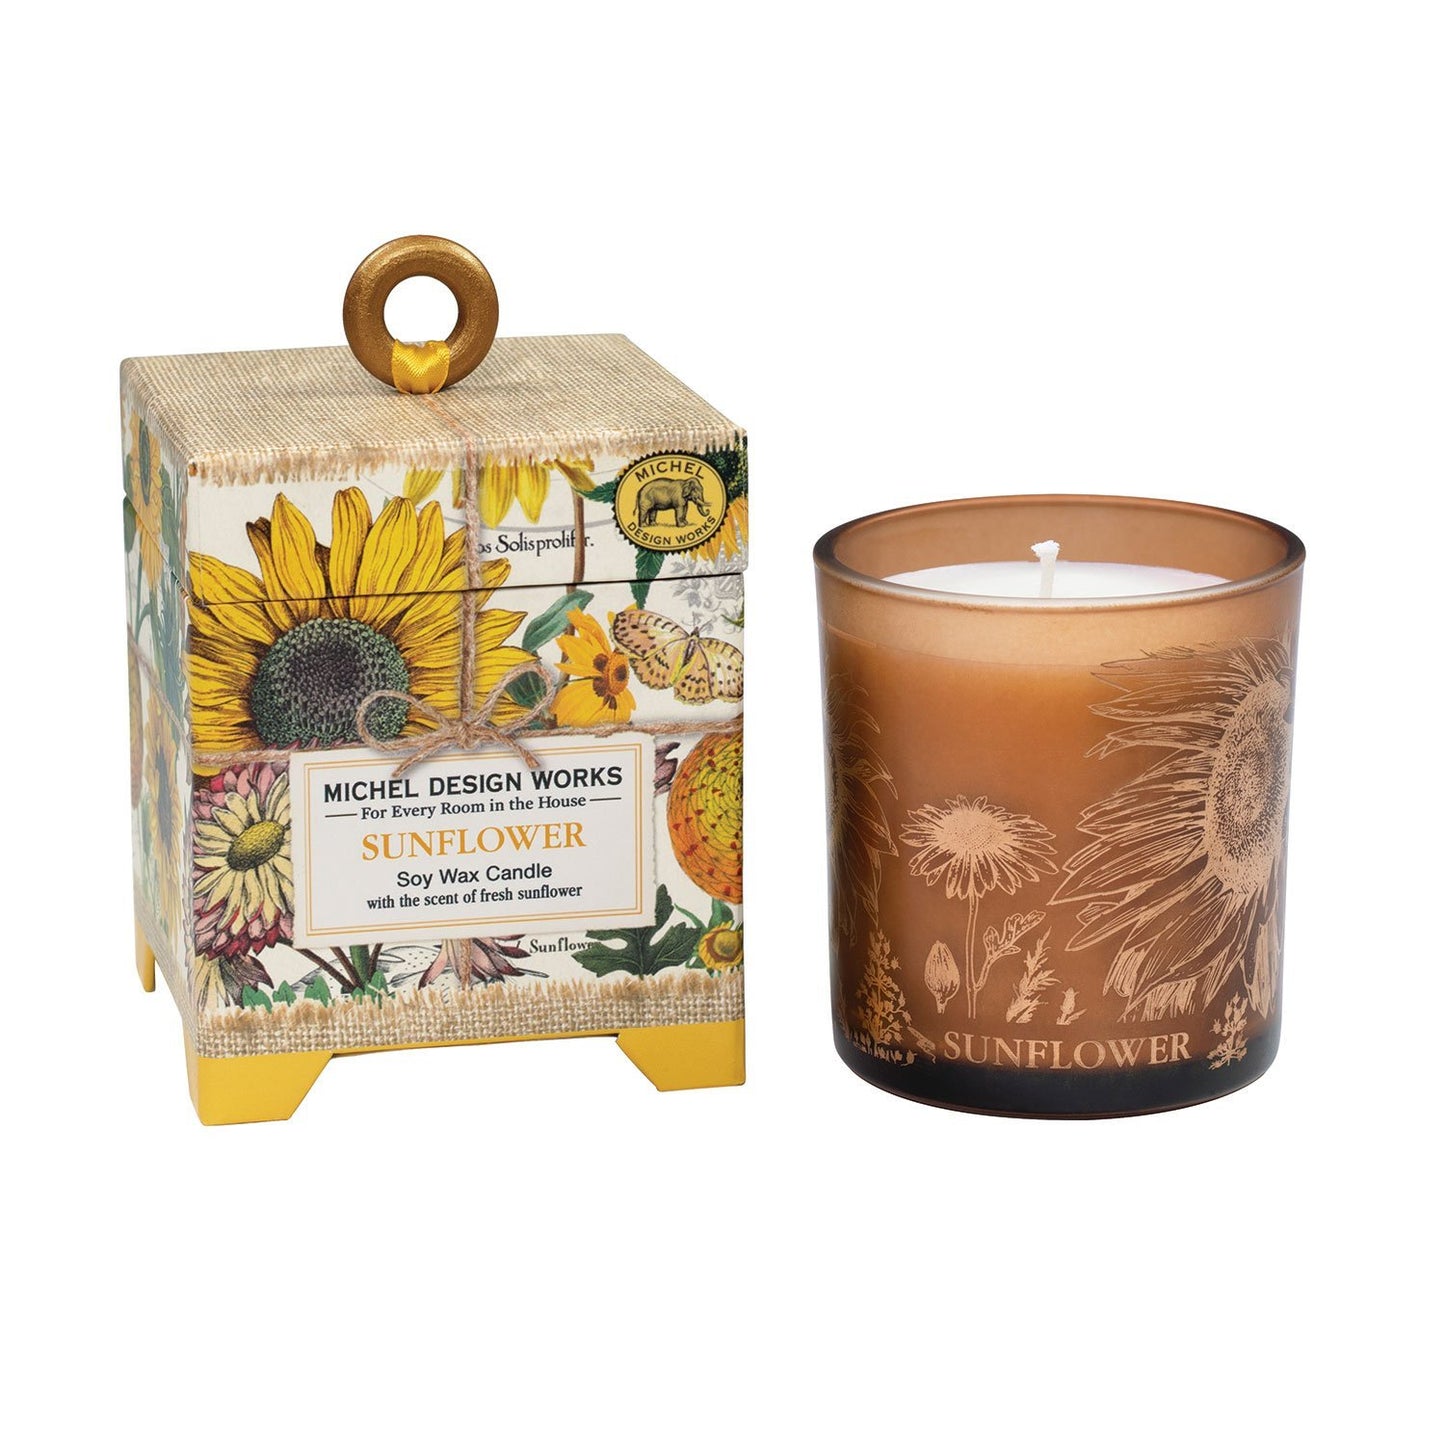 Sunflower 6.5 oz. Soy Wax Candle Autumnal Bliss with Fresh Sunflower Fragrance